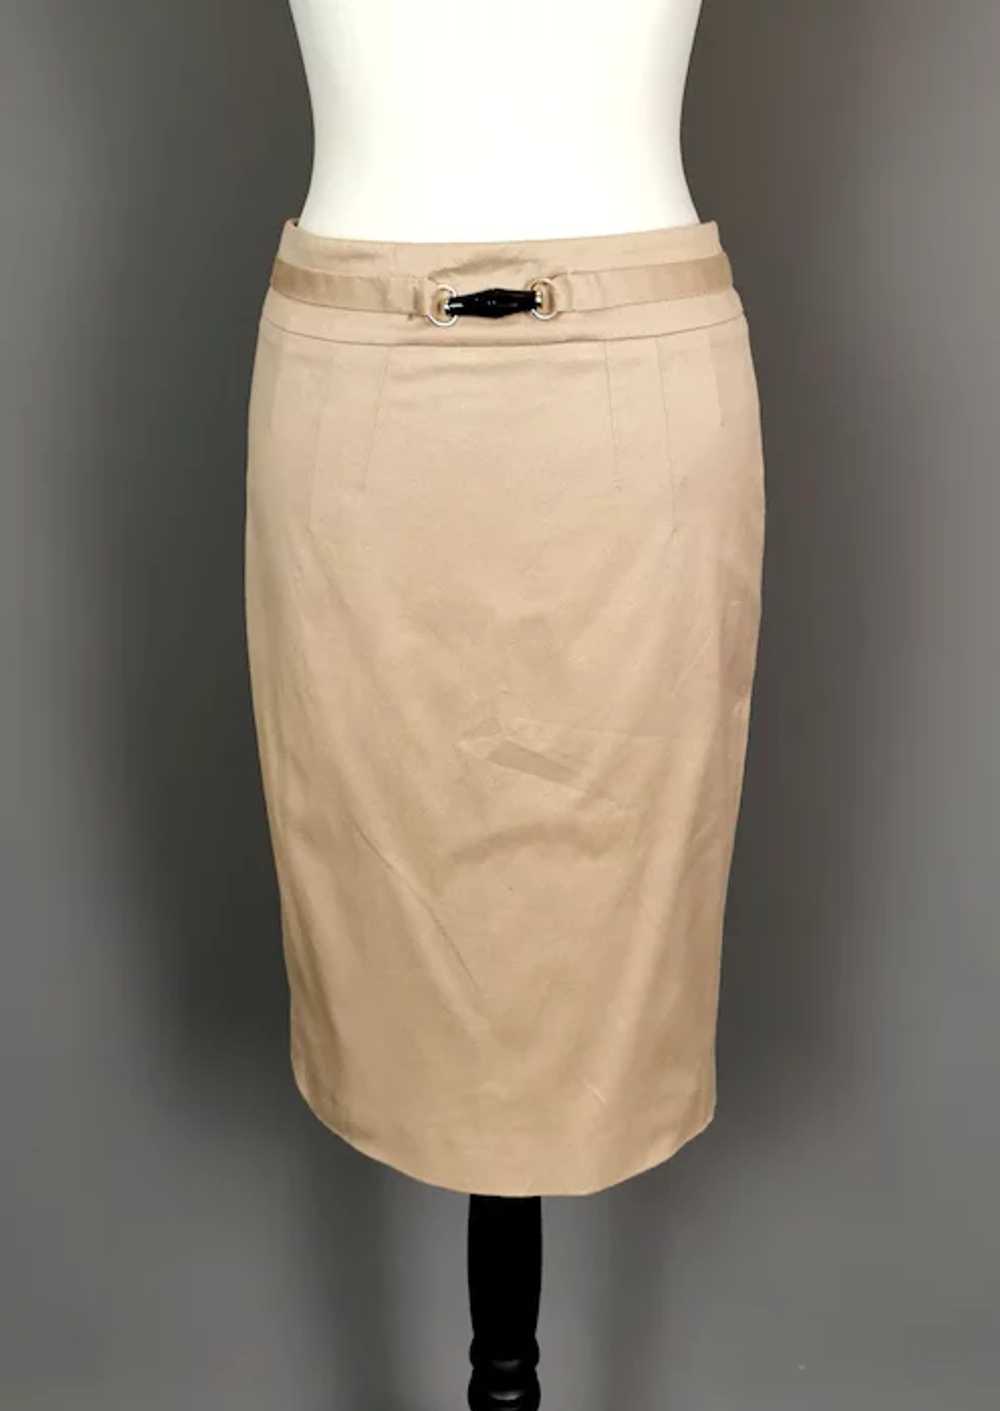 Vintage Gucci Tom Ford bamboo trim pencil skirt - image 3